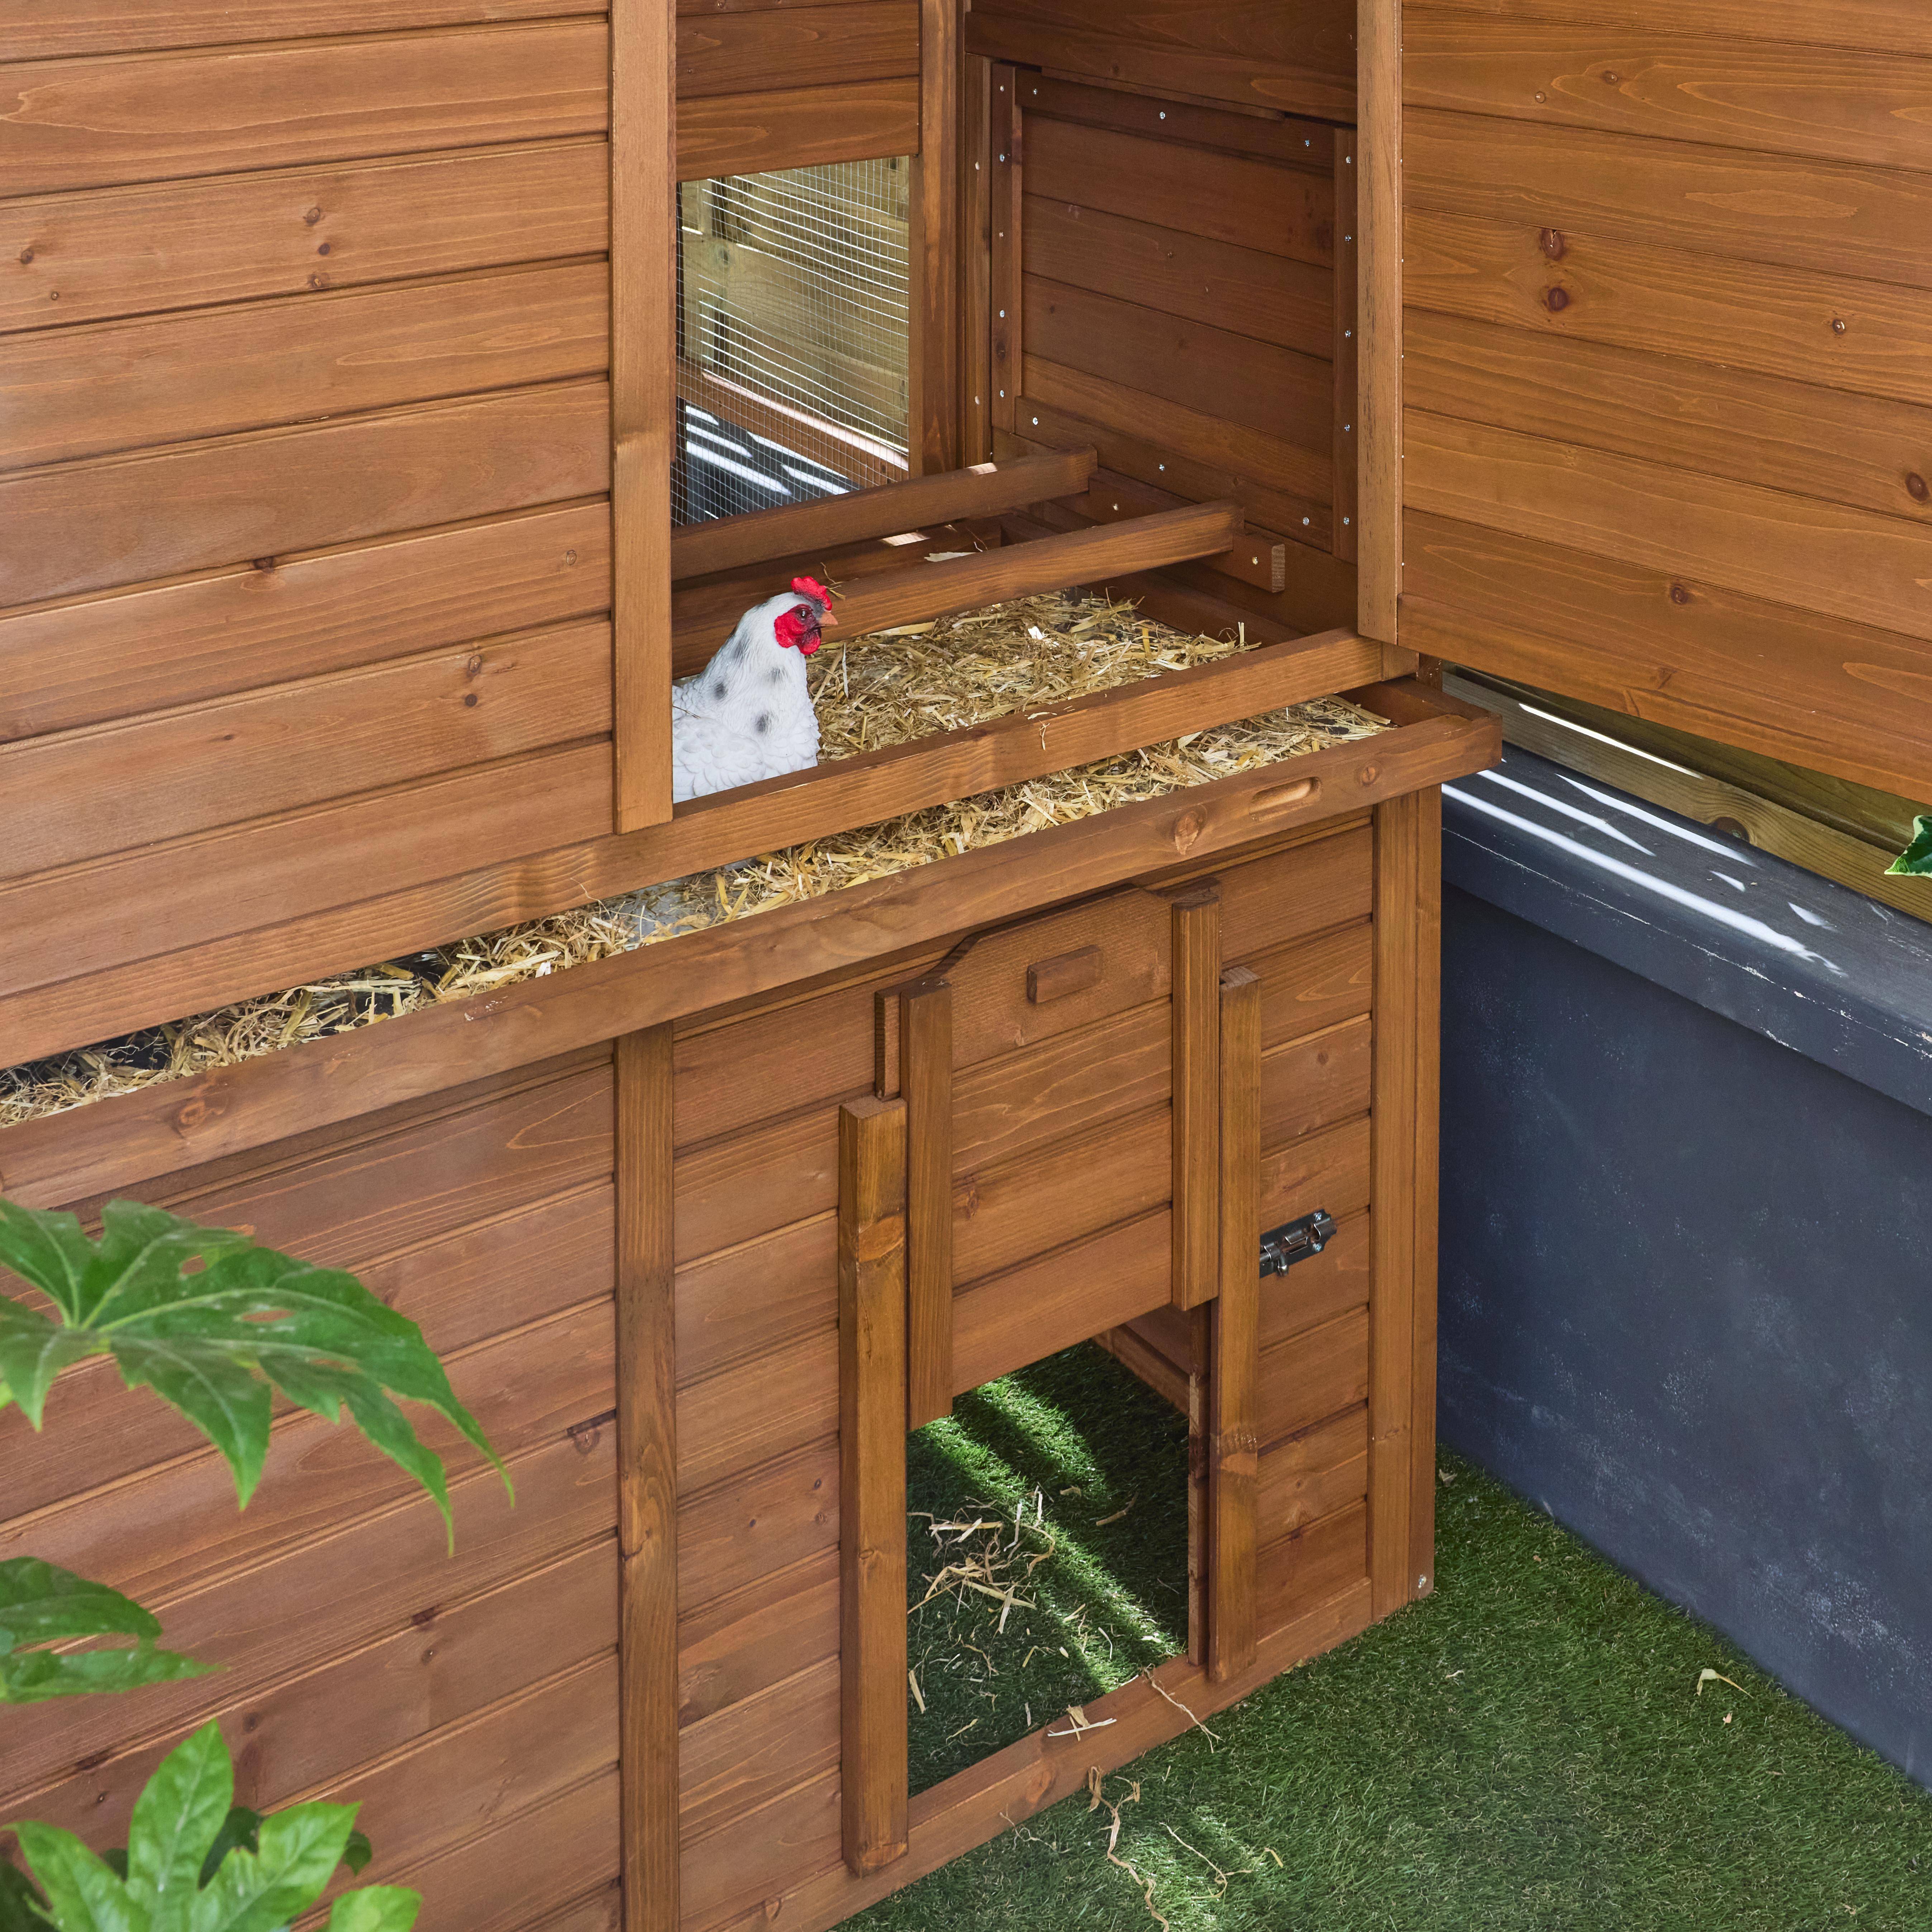 Wooden chicken coop - backyard hen cage for 6 to 8 chickens, indoor and outdoor space - Cotentine - Wood colour,sweeek,Photo2